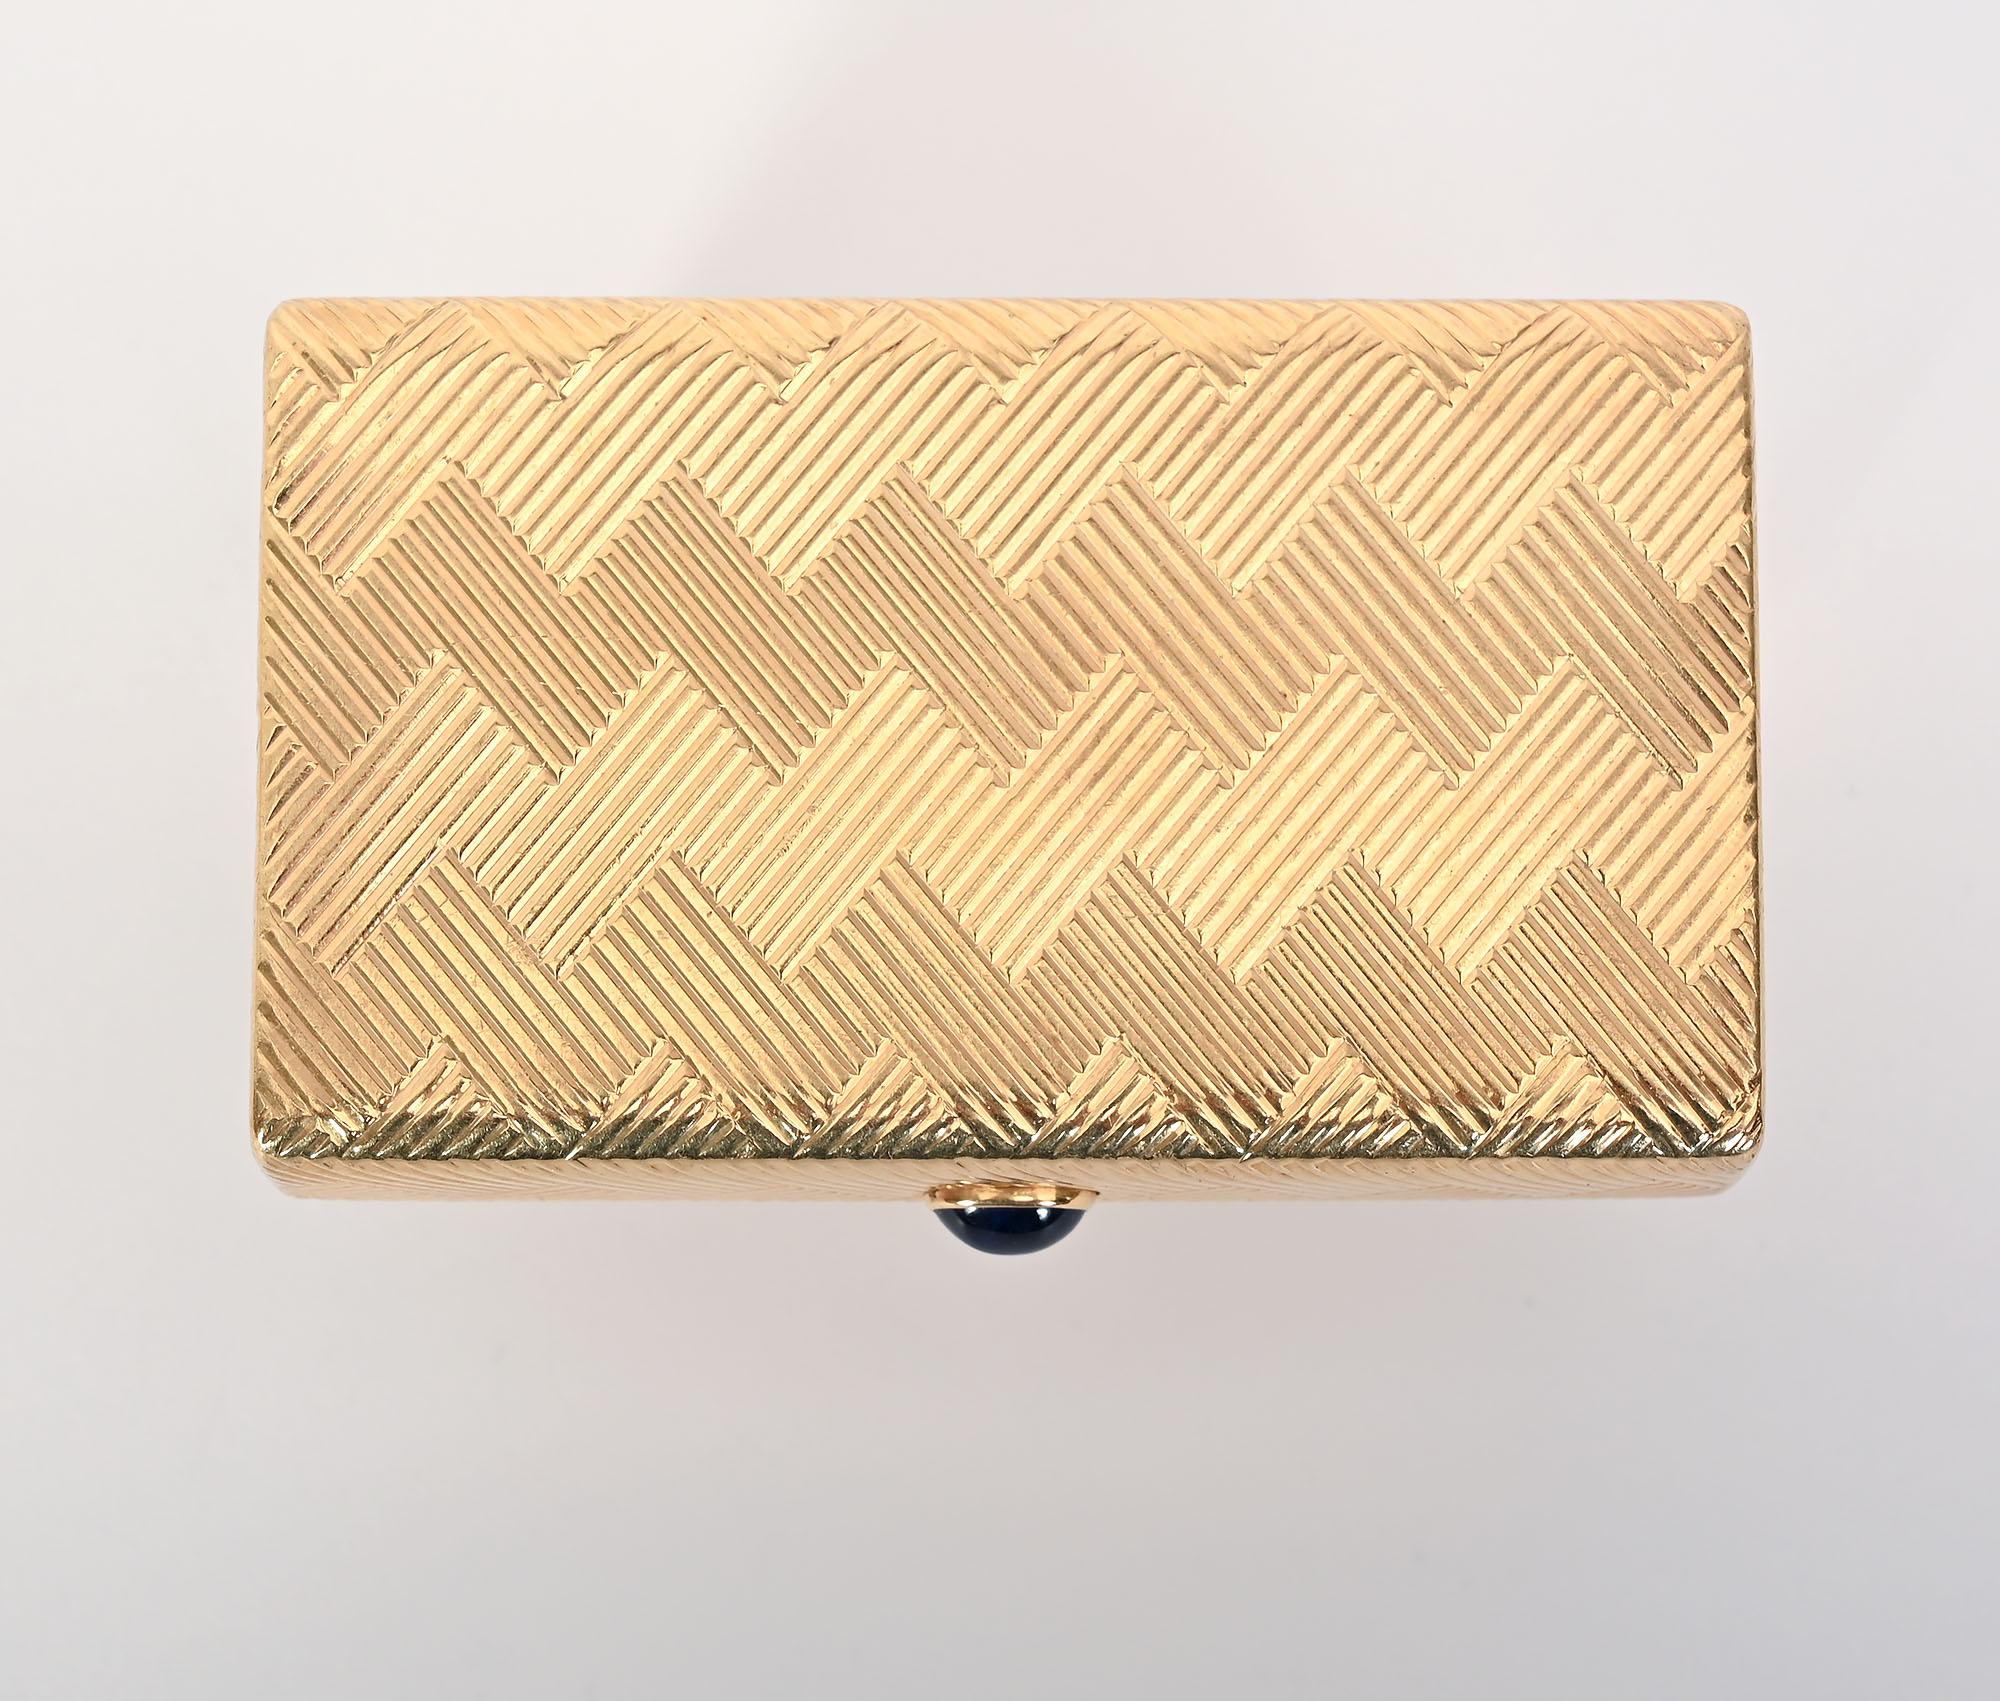 Elegant 14 karat gold minaudiere  by Cartier from the 1940's. This Retro piece has a double zig zag design on all surfaces. The clasp is a cabochon sapphire. The box measures 2 7/8 inches wide; 1 5/8 inches deep and 5/8 inch tall. It is in excellent